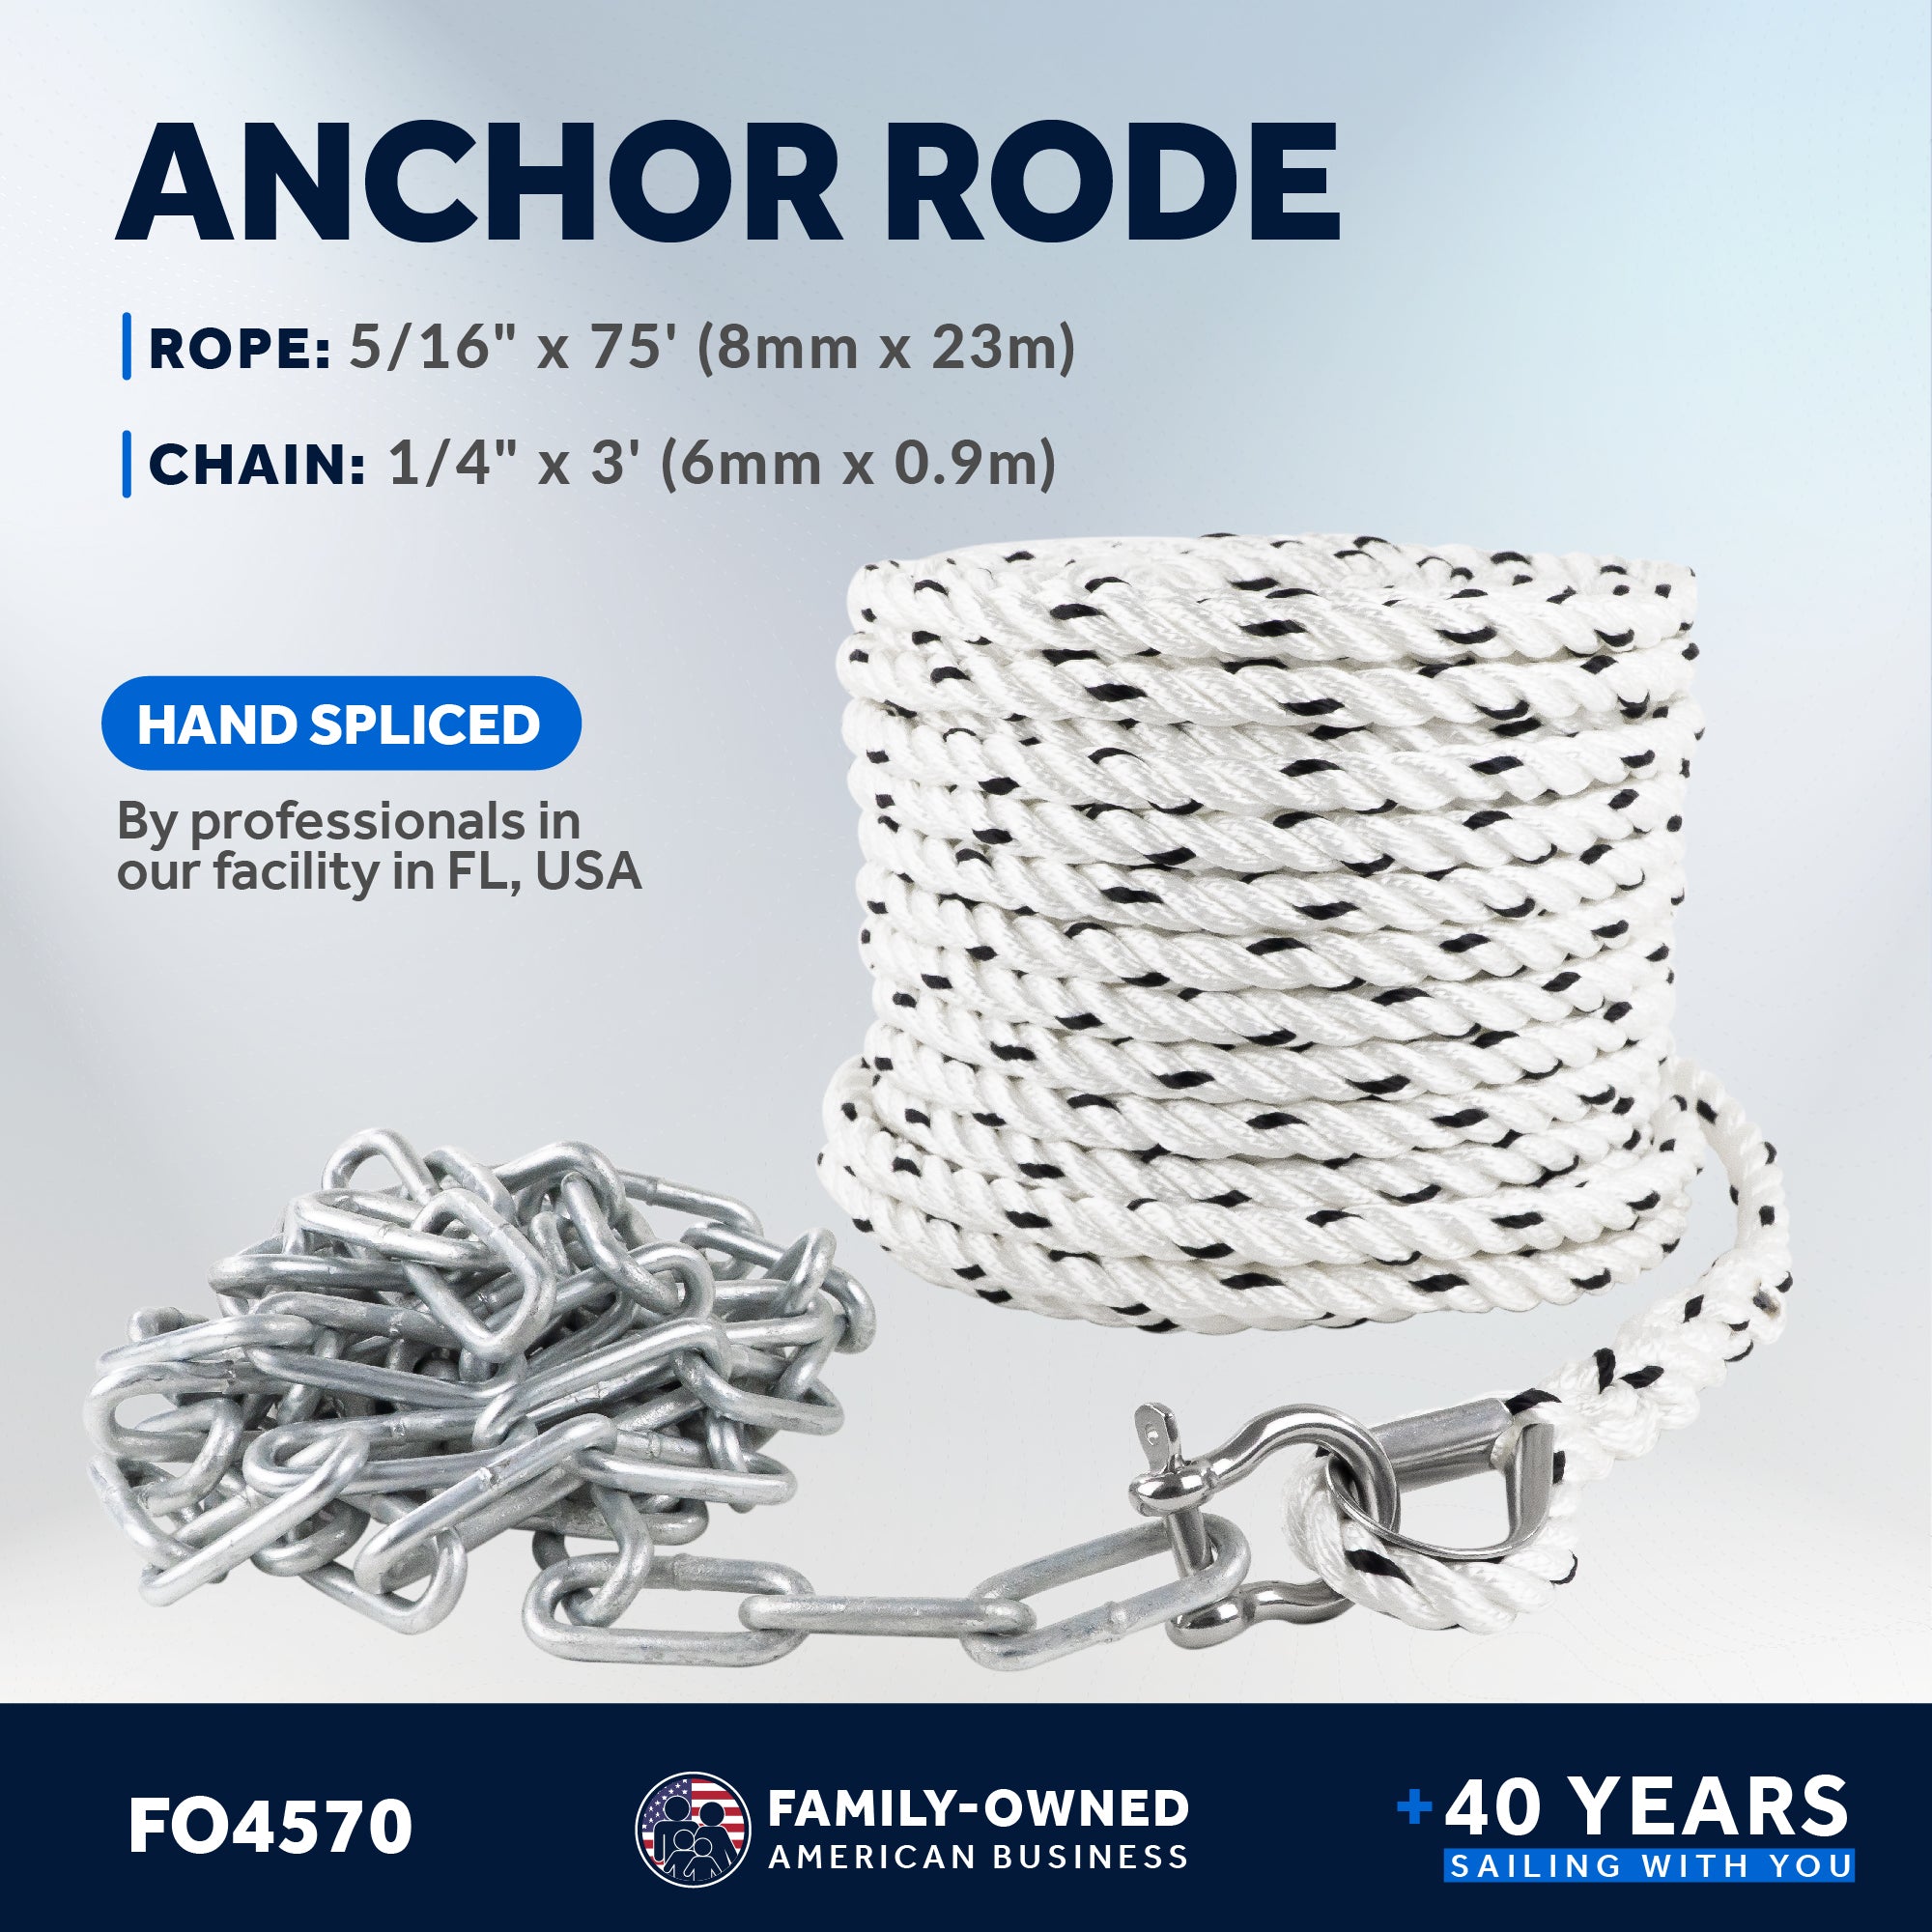 Anchor Rode, 5/16" x 75' Nylon 3-Strand Rope, 1/4" x 3' Hot Dipped Galvanized Steel Chain - FO4570